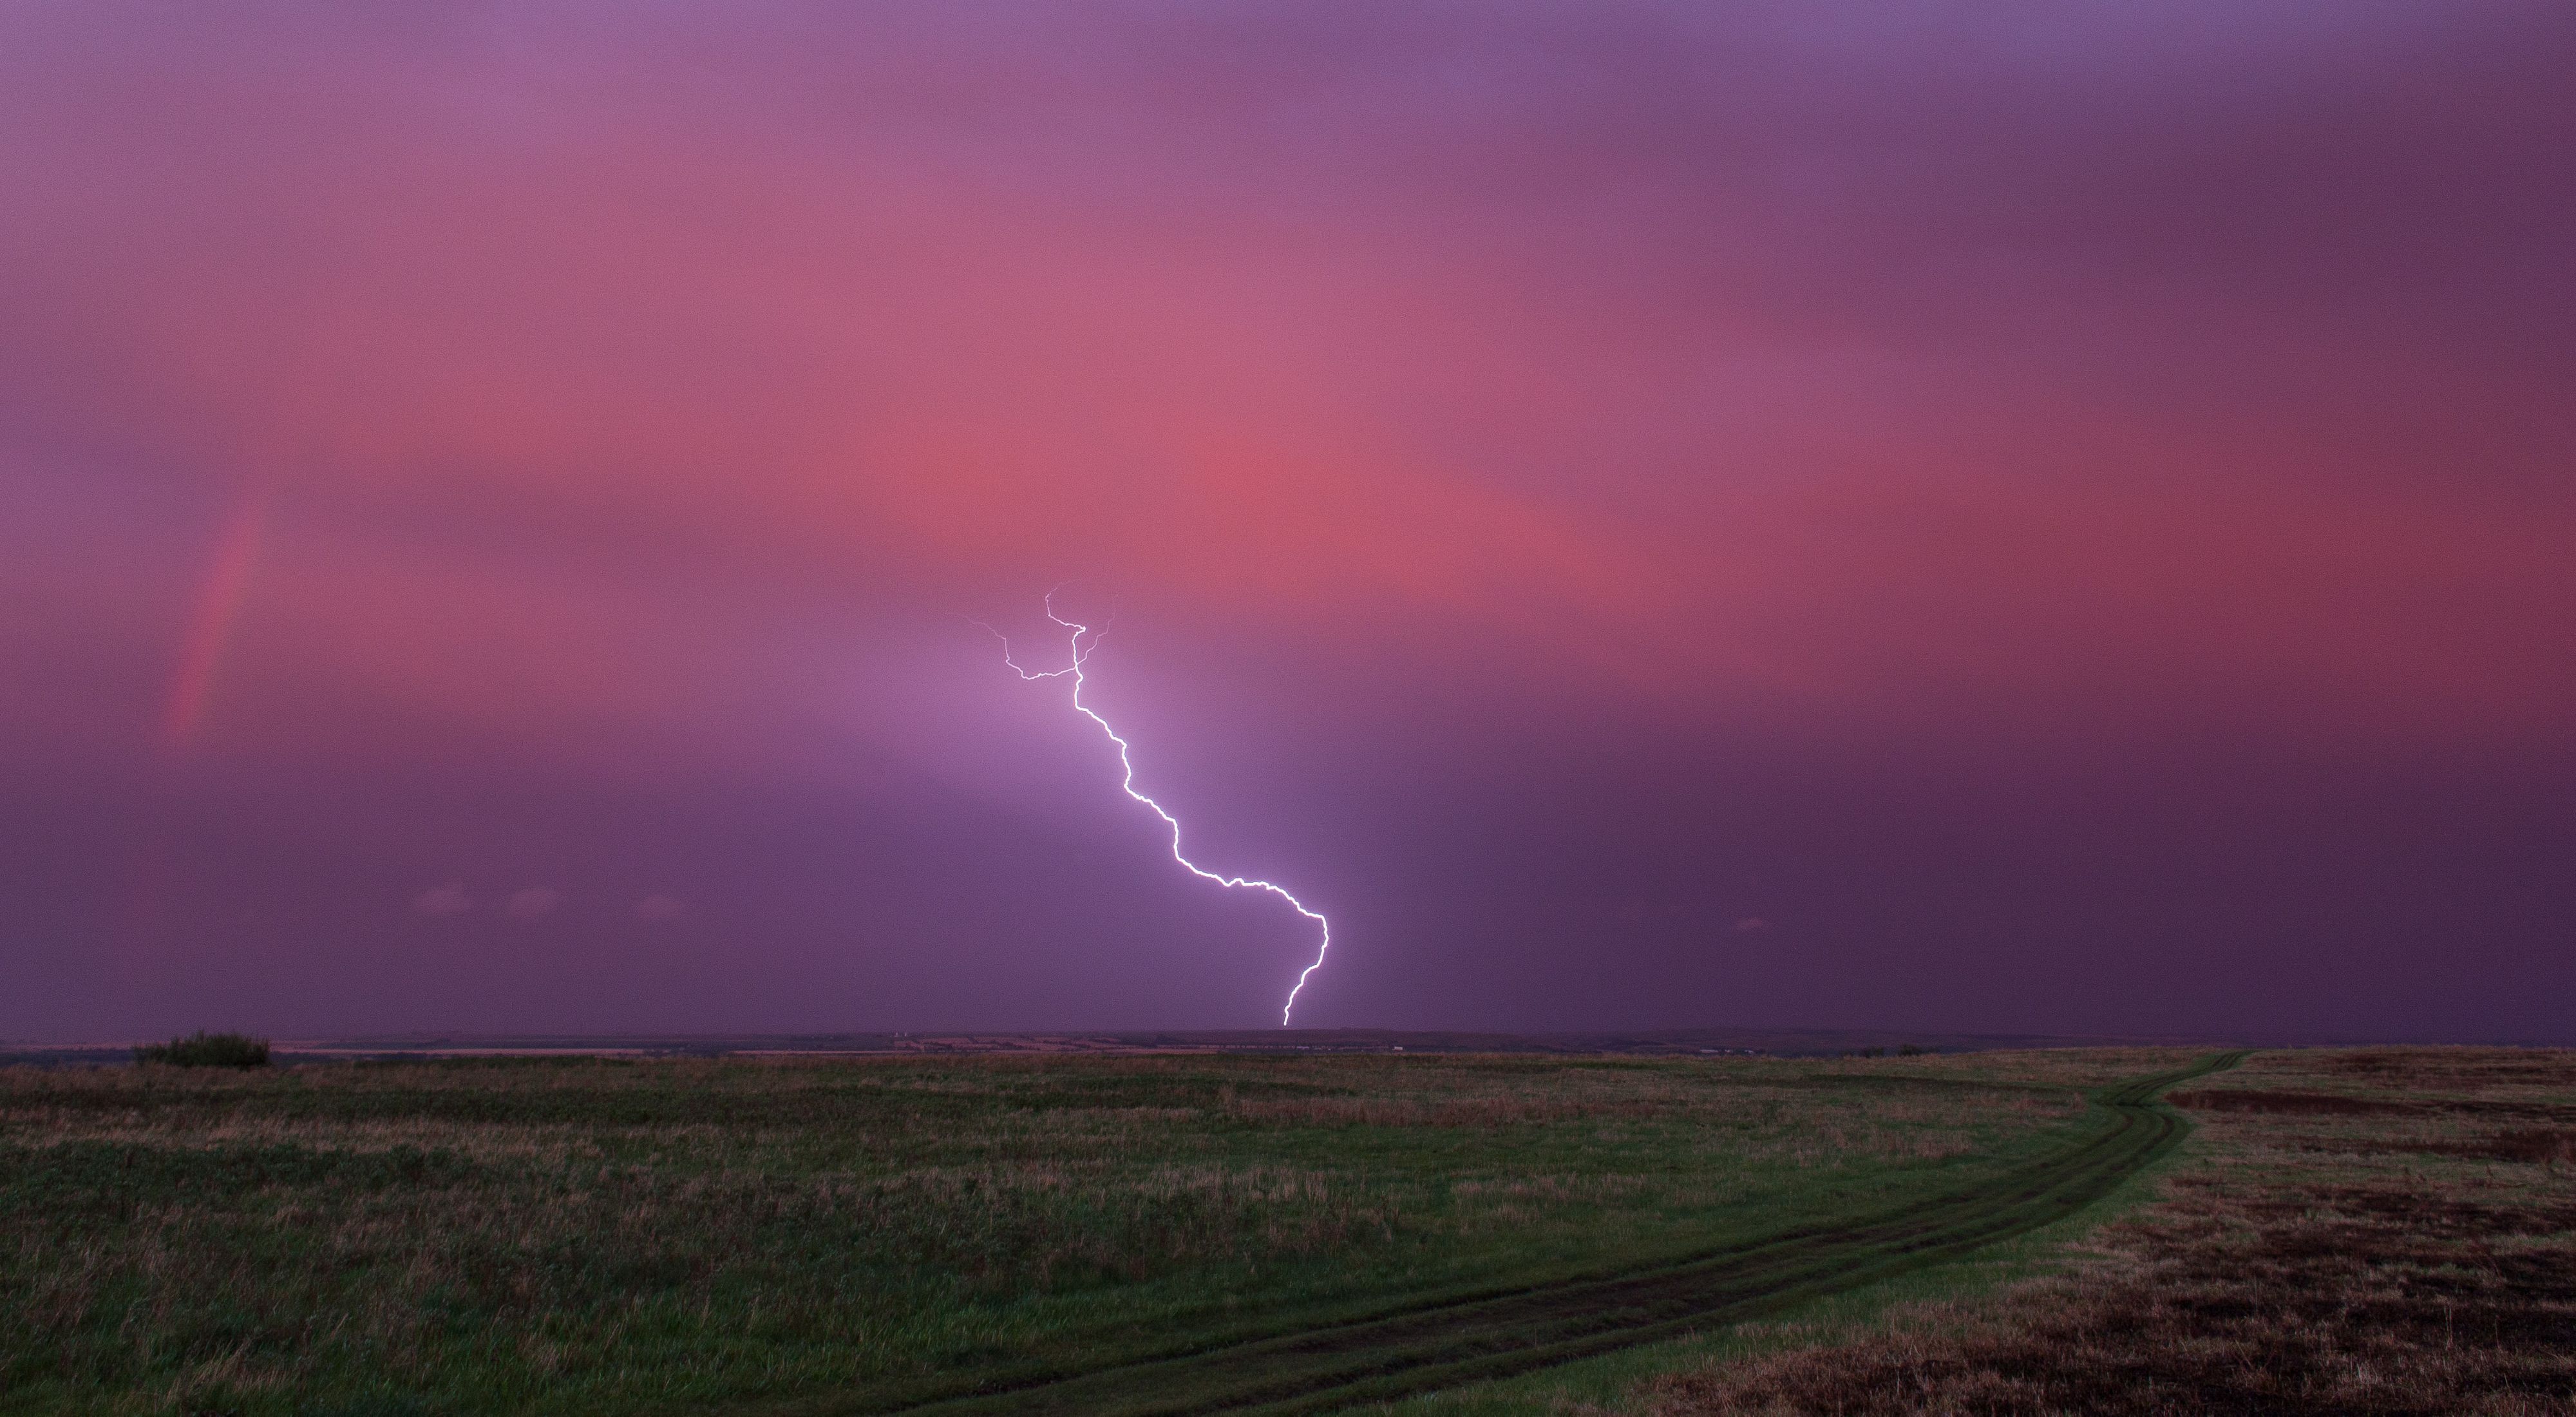 Lightning strikes the prairie out of a pink-purple sky.